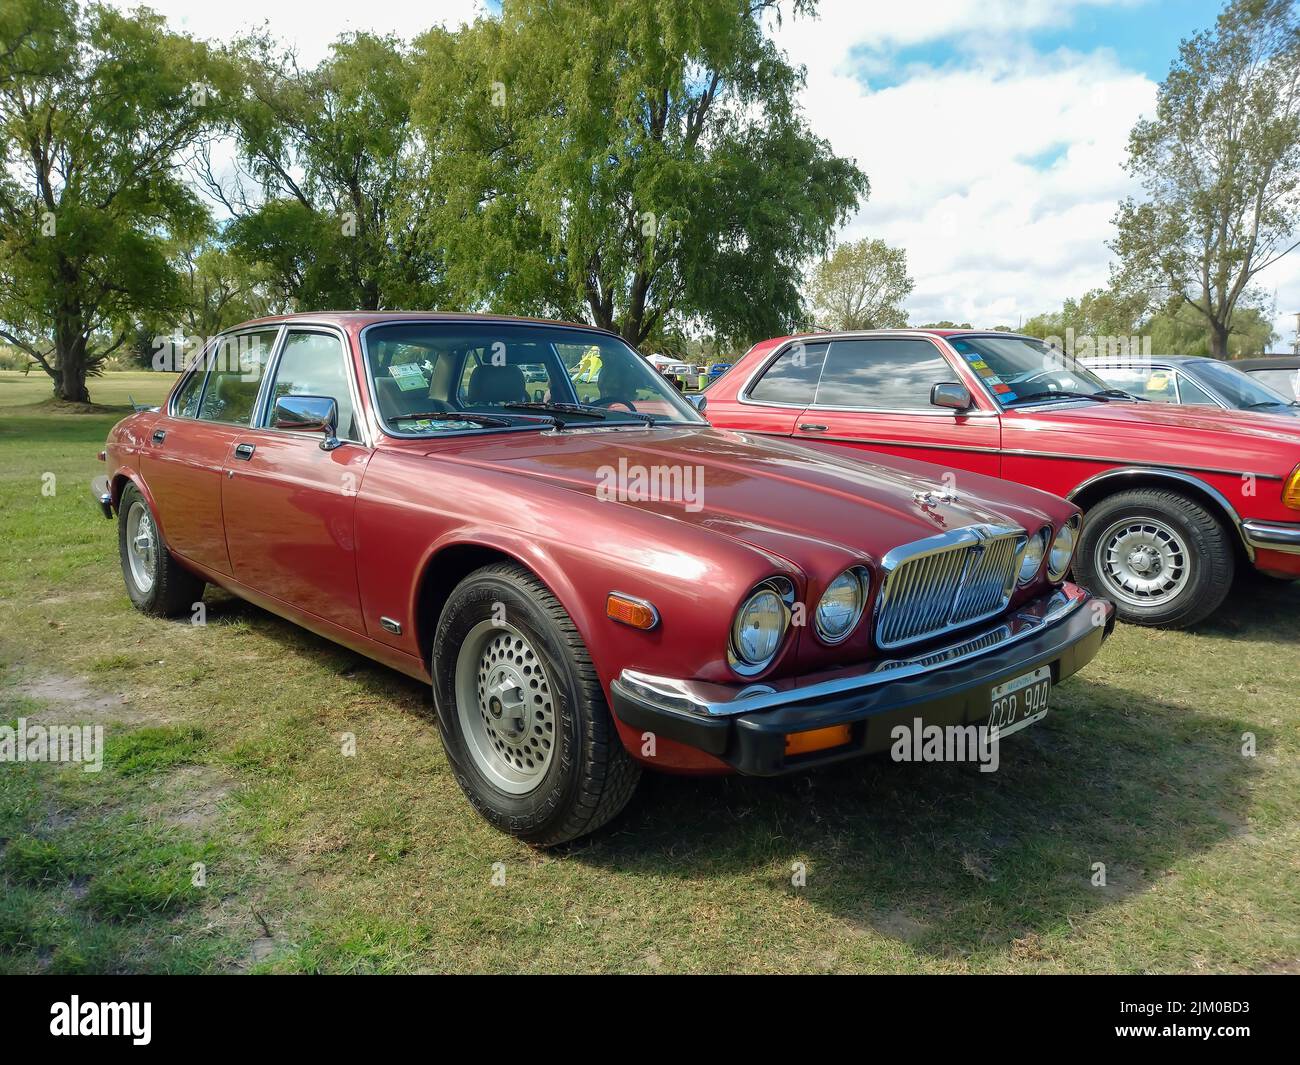 Chascomus, Argentina - Apr 9, 2022: Red maroon Jaguar XJ6 Series 3 four door saloon 1979 - 1992 parked on the grass. Nature trees in the background. C Stock Photo